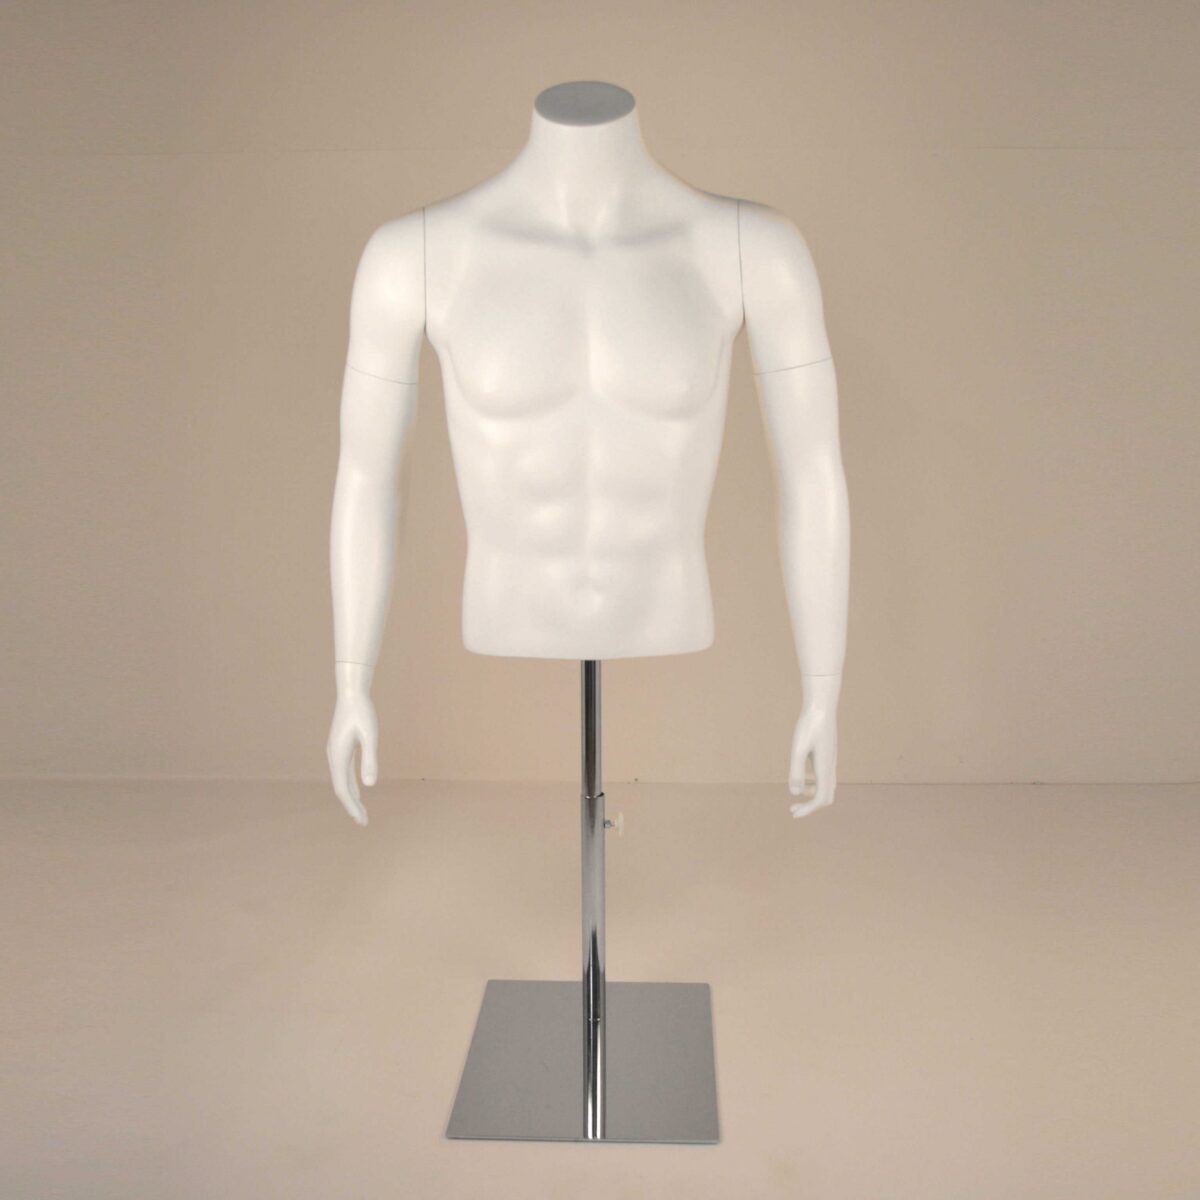 Headless Male Counter Top Mannequin